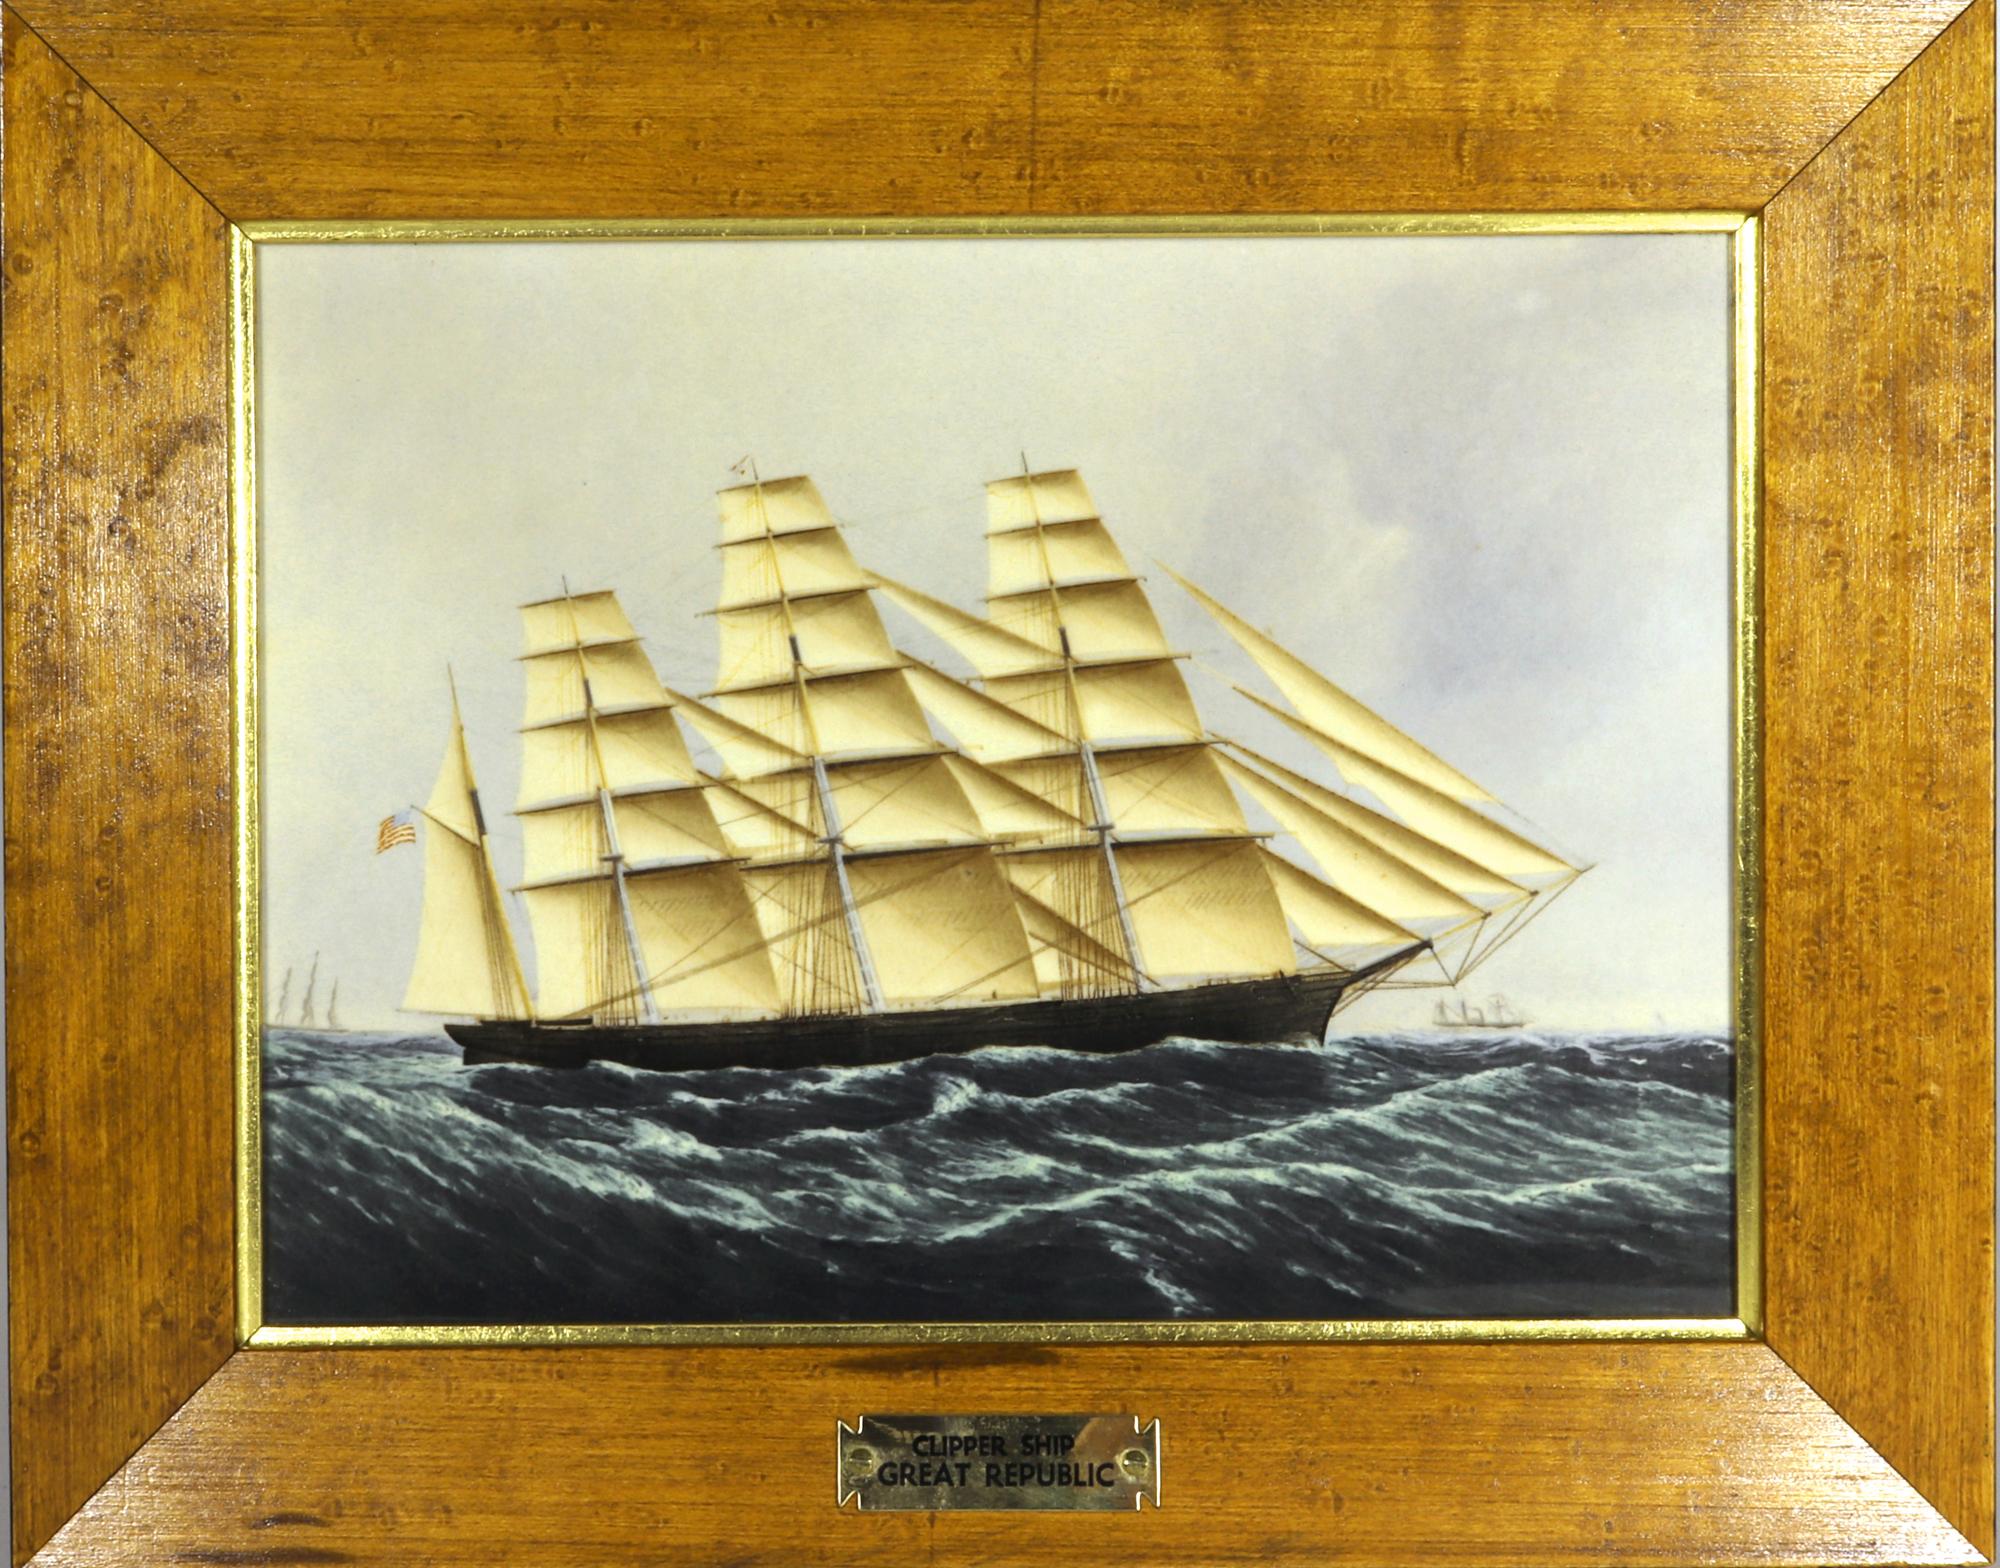 English Wedgwood Porcelain Plaques of Ships, the Clipper Ship, Great Republic & Clipper For Sale